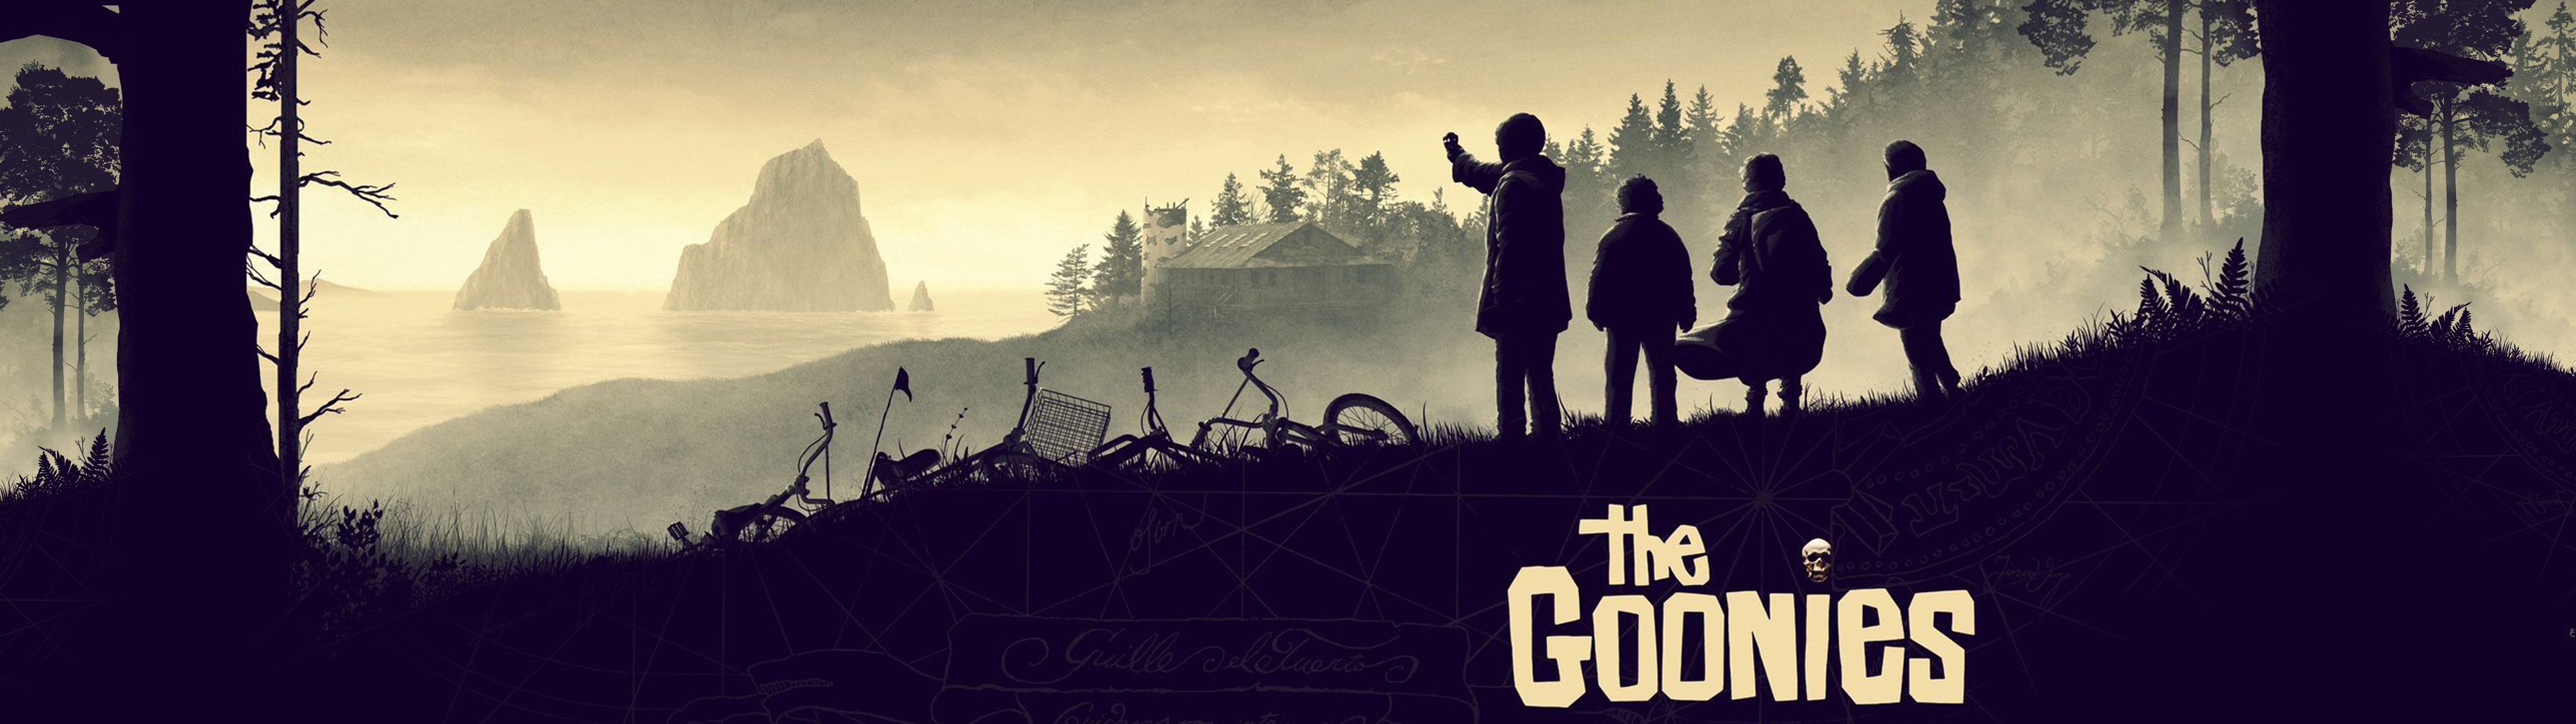 3840x1080 The Goonies Wallpapers Wallpapers All Superior The Goonies Wallpapers Backgrounds